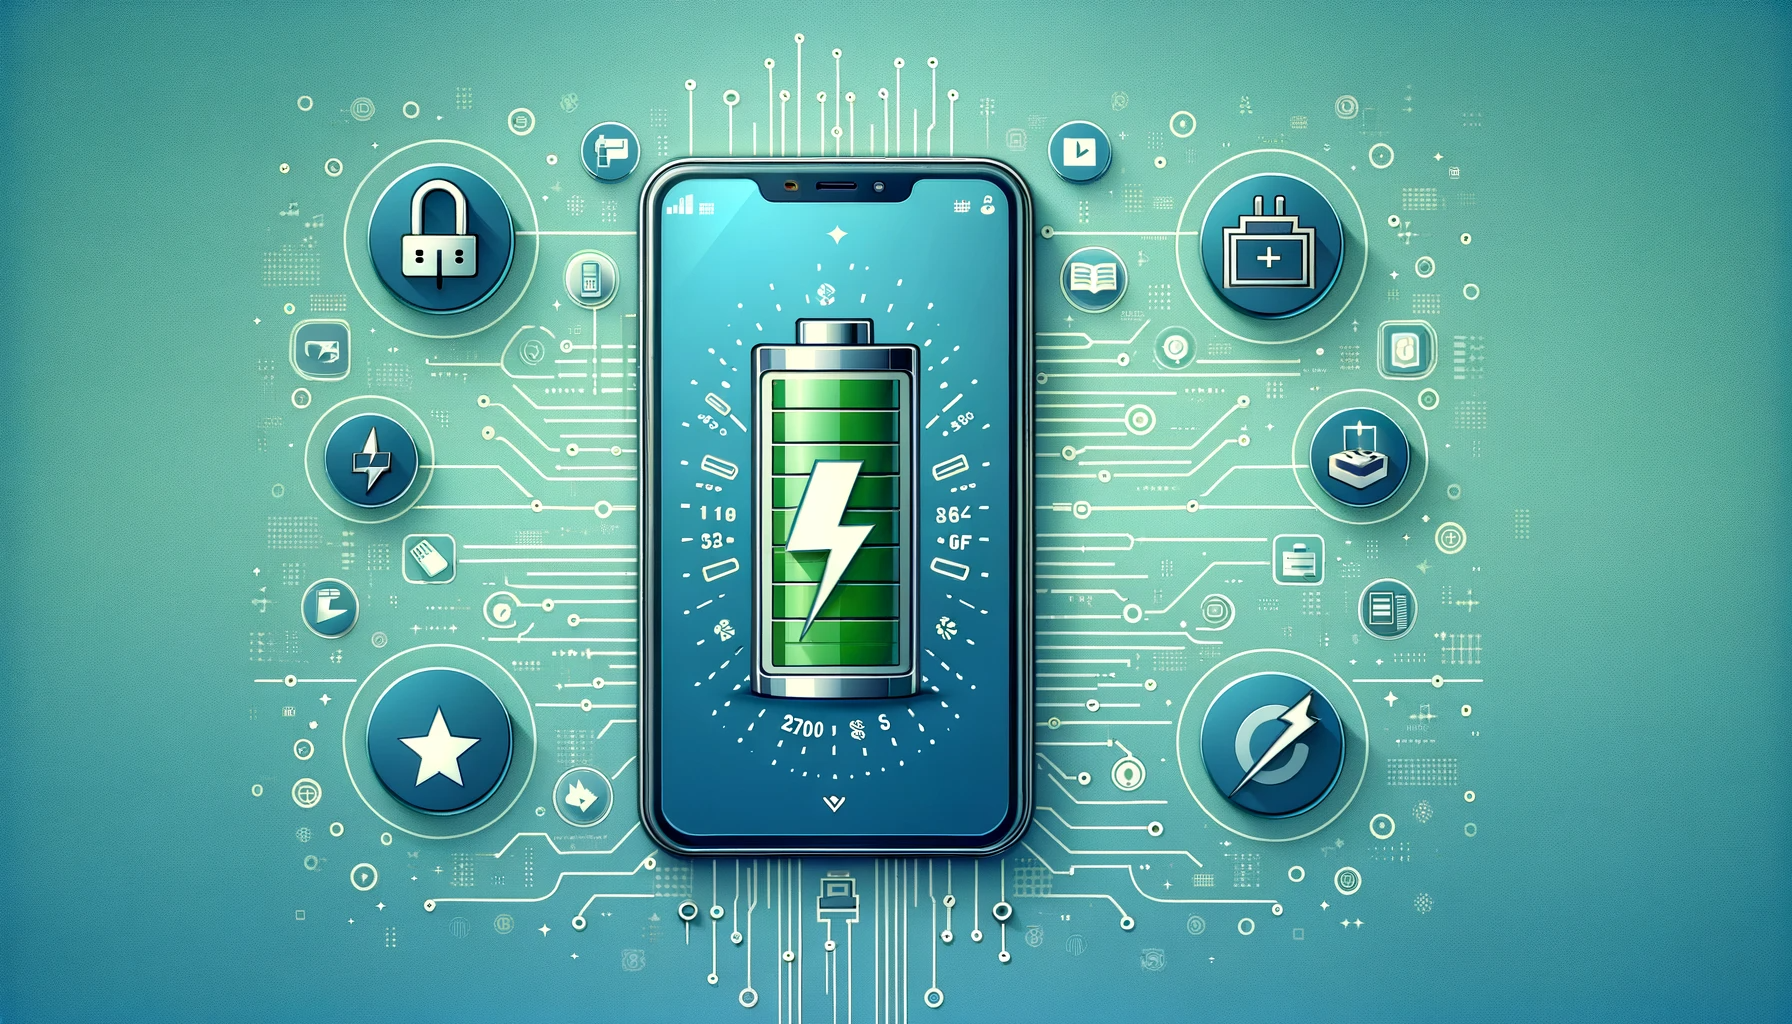 Maximizing Mobile Health: The Essential Guide to Phone Battery Care by Mobile Care